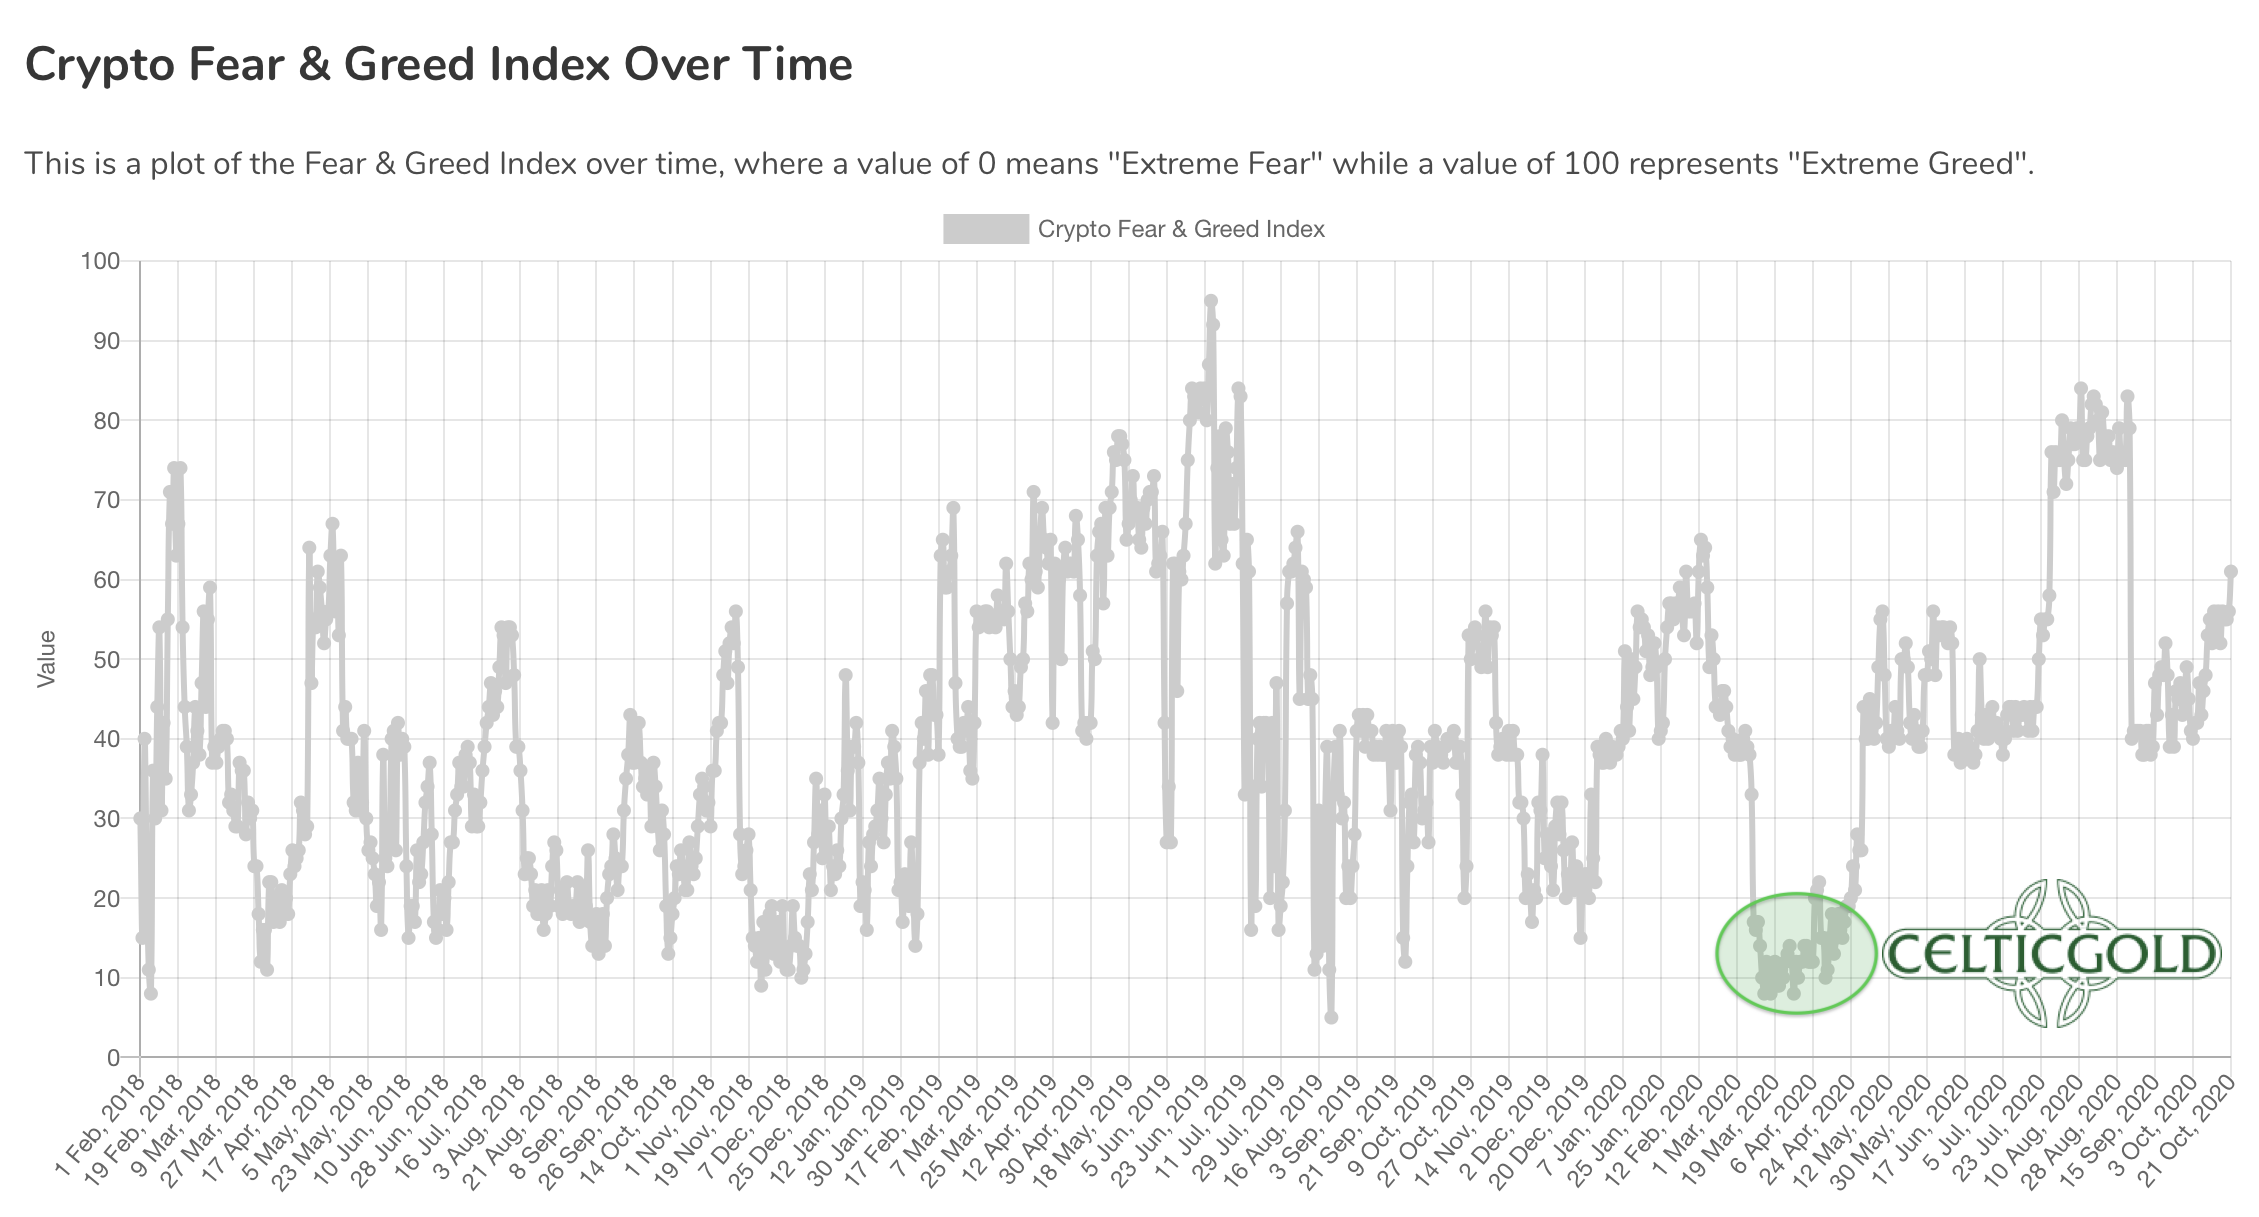 Crypto Fear & Greed Index as of October 21st 2020. Source: Crypto Fear & Greed Index